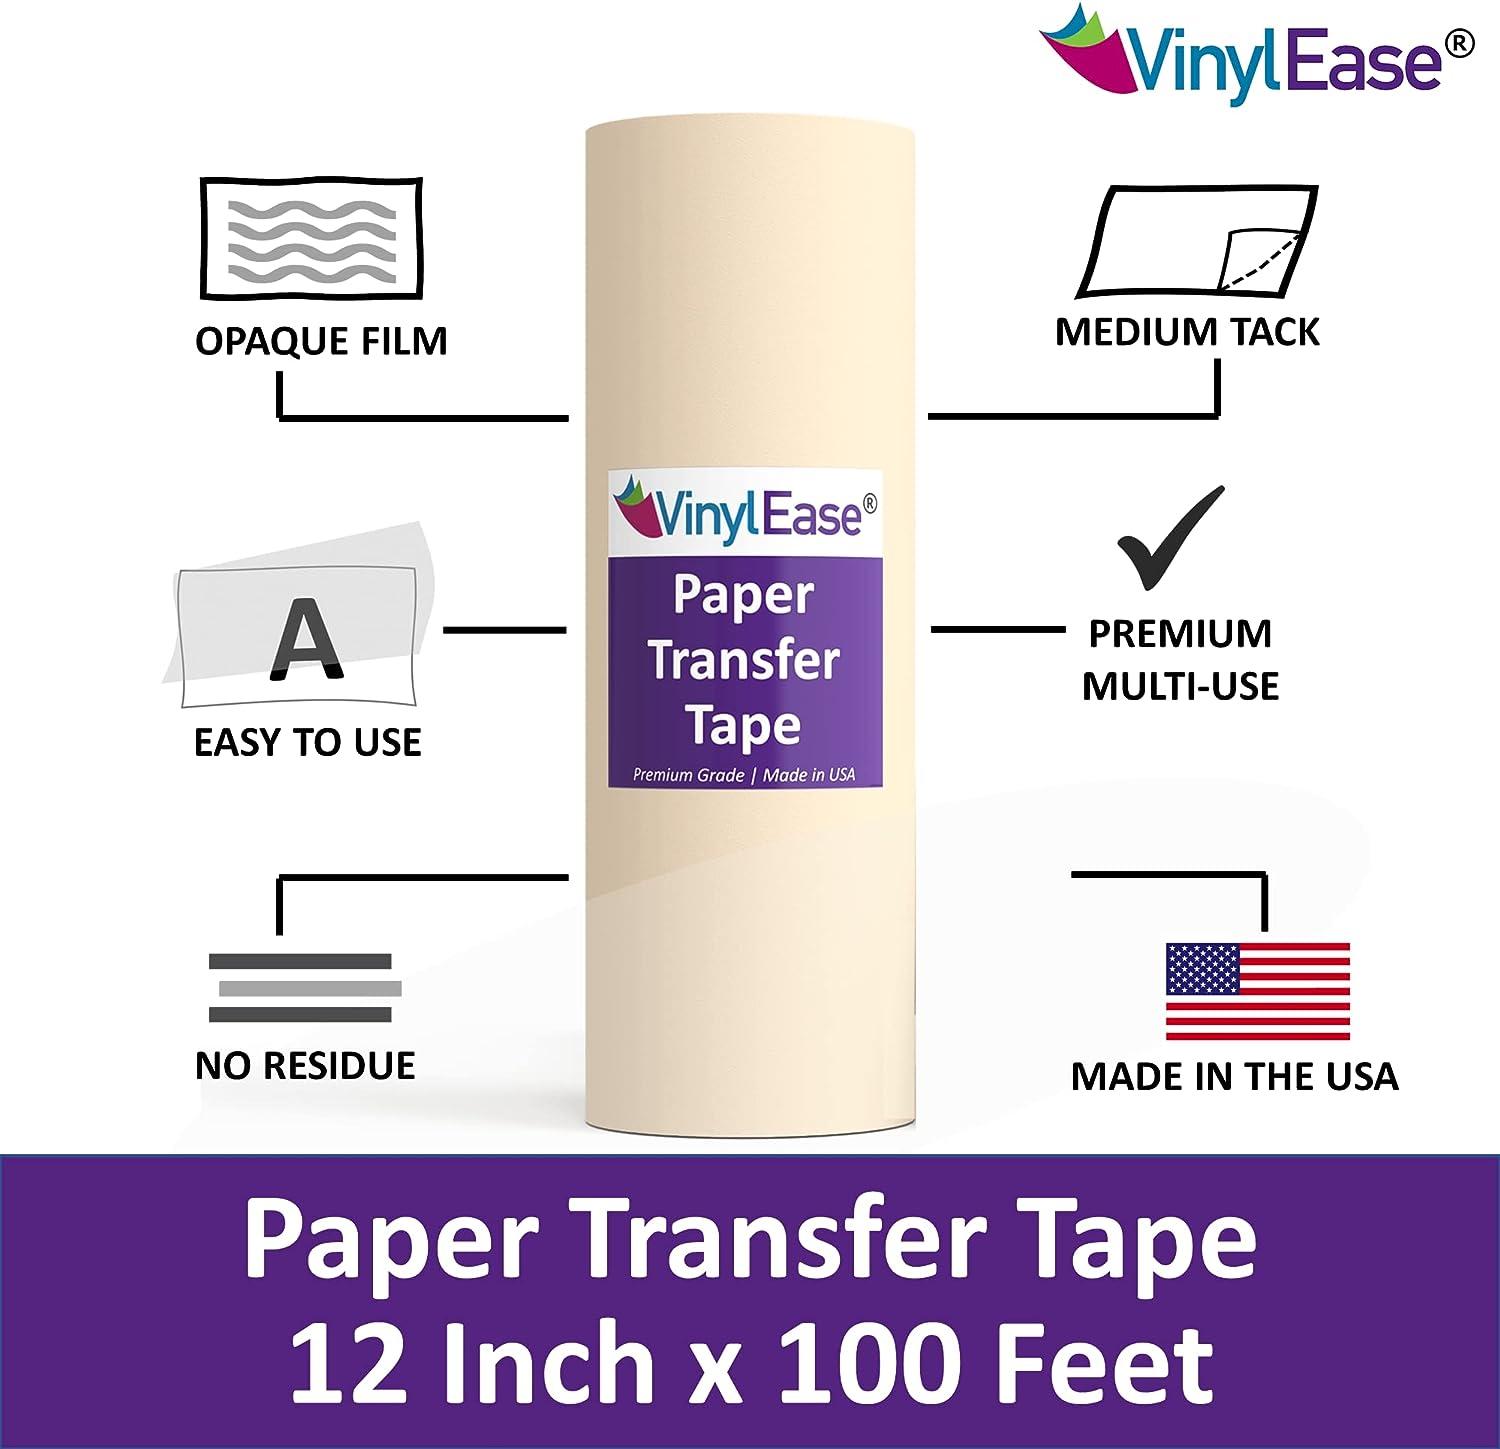 Vinyl Ease 12inch x 100 feet roll of Paper Transfer Tape with a